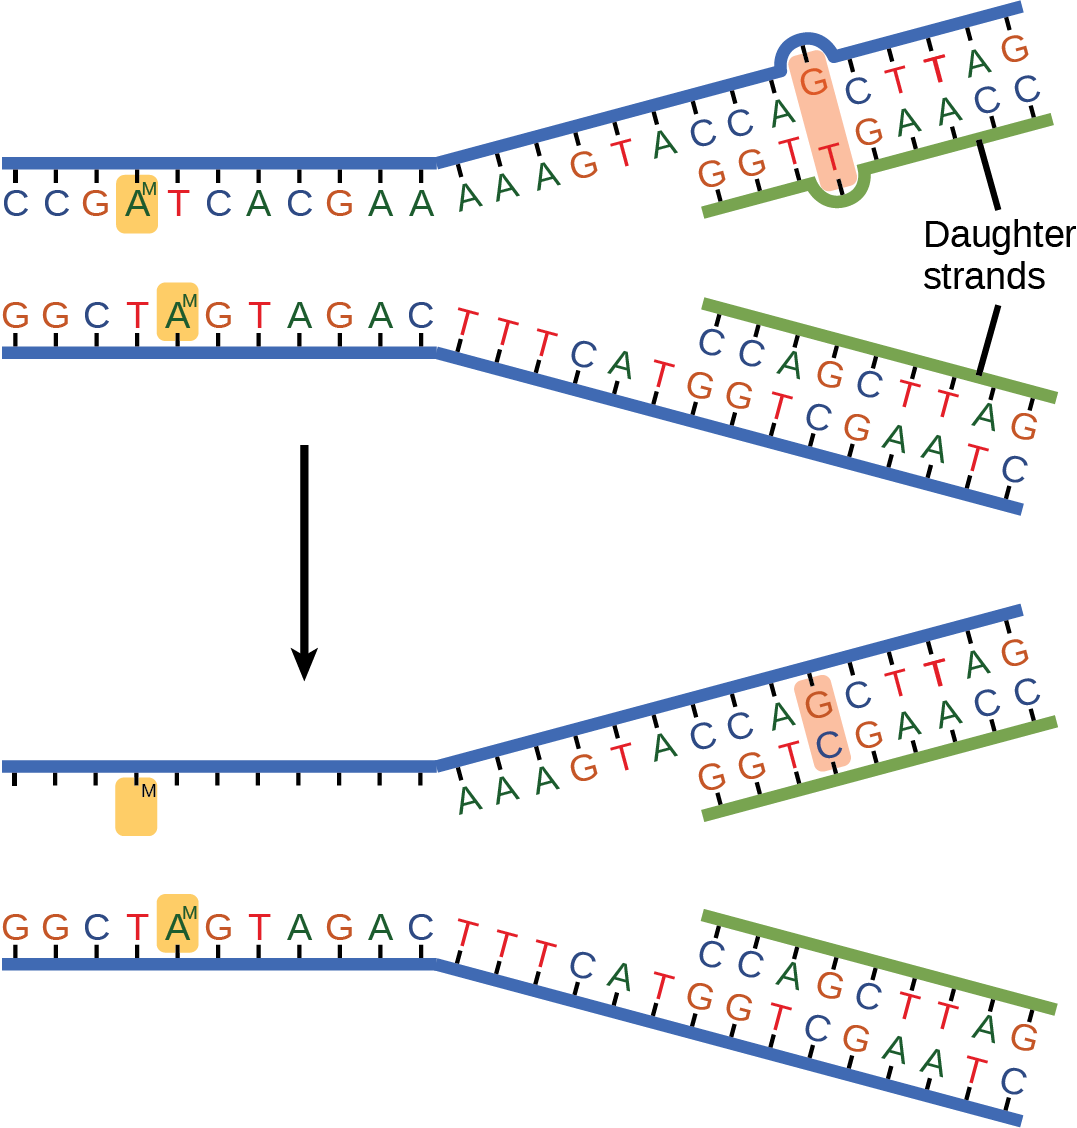 The top illustration shows a replicated DNA strand with G-T base mismatch. The bottom illustration shows the repaired DNA, which has the correct G-C base pairing.